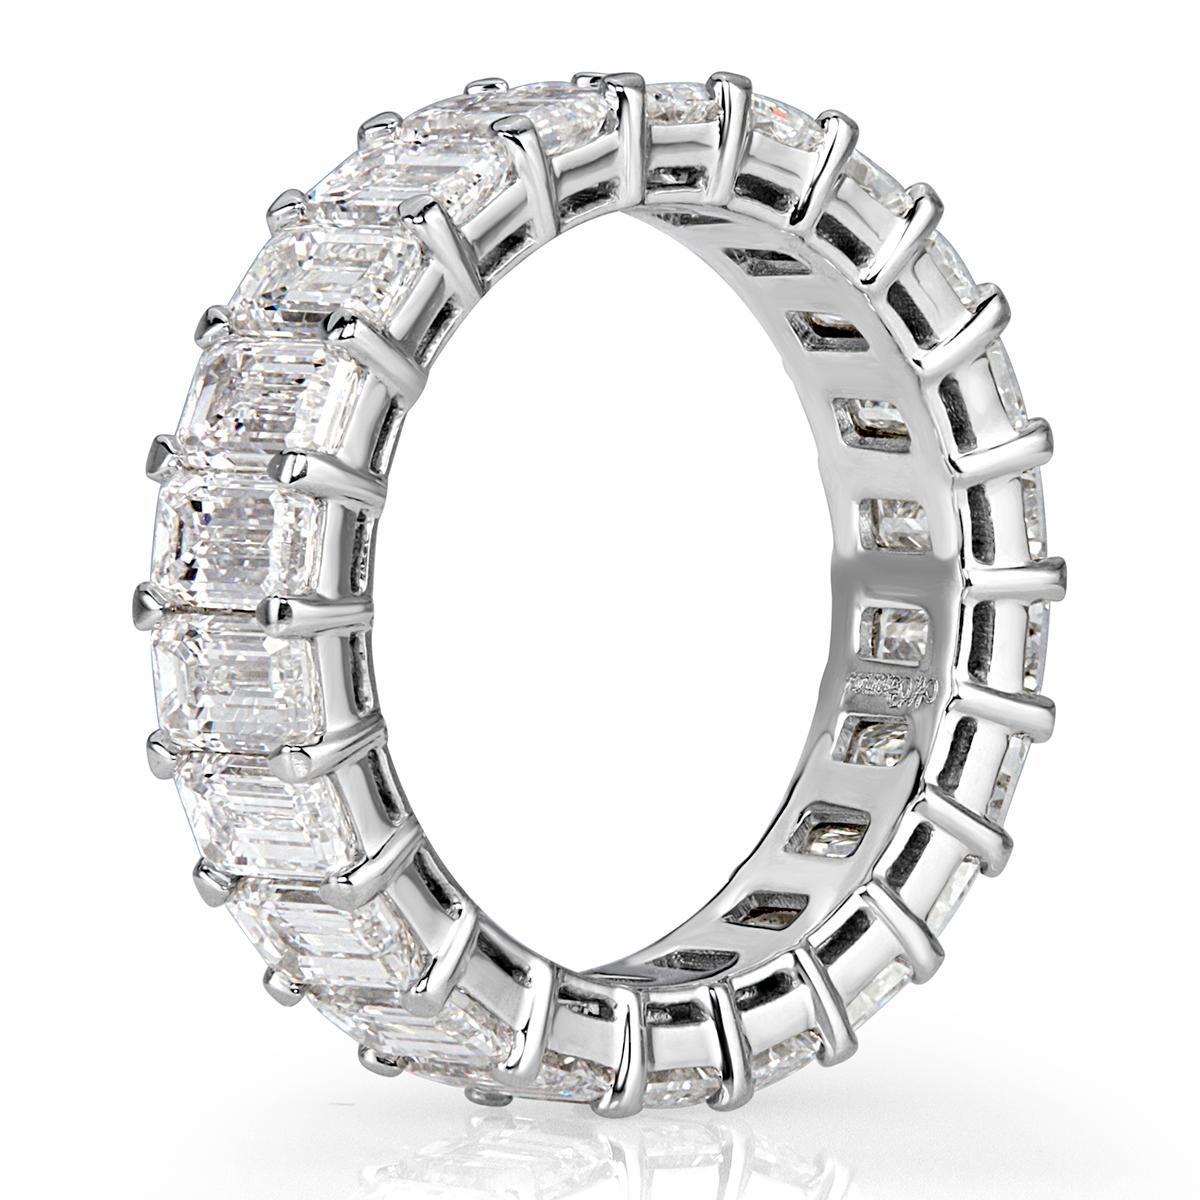 This stunning diamond eternity band showcases 6.69ct of perfectly matched emerald cut diamonds graded at E-F, VVS2-VS1. The diamonds are set in a classic 18k white gold basket setting style. All eternity bands are shown in a size 6.5. We custom